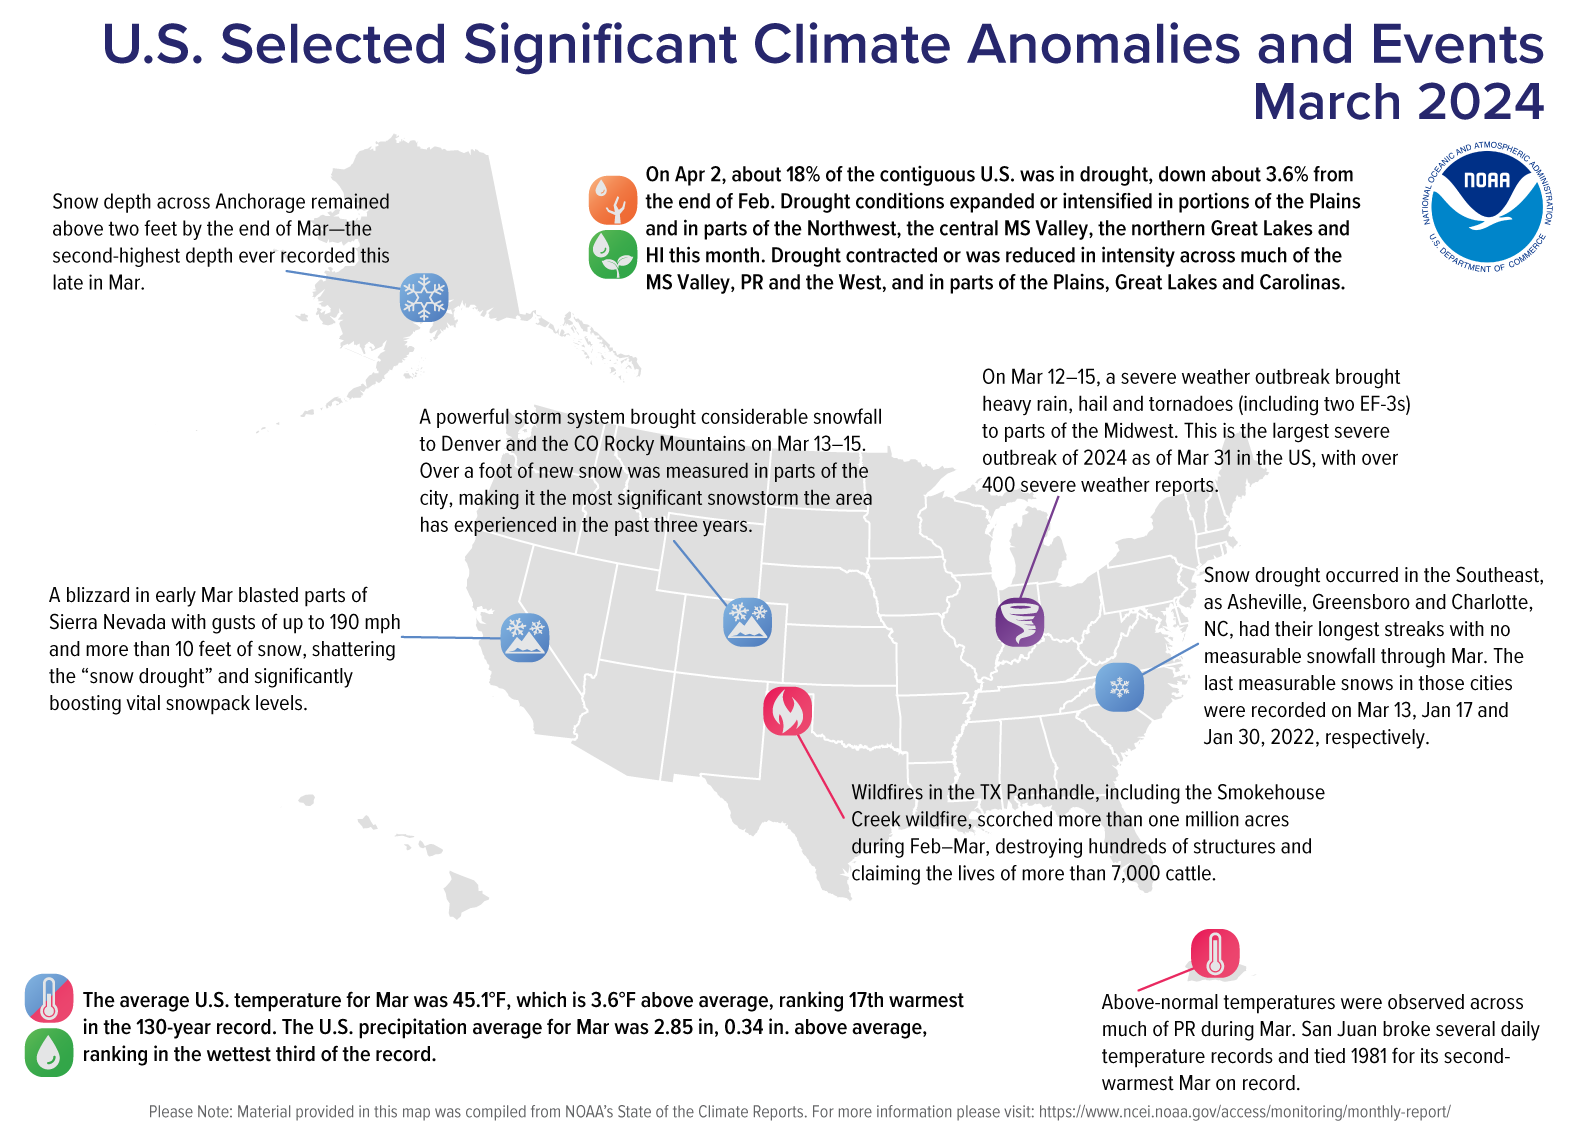 A map of the U.S. plotted with significant climate events that occurred during March 2024. Please see the story below as well as more details in the report summary from NOAA NCEI at http://bit.ly/USClimate202403.